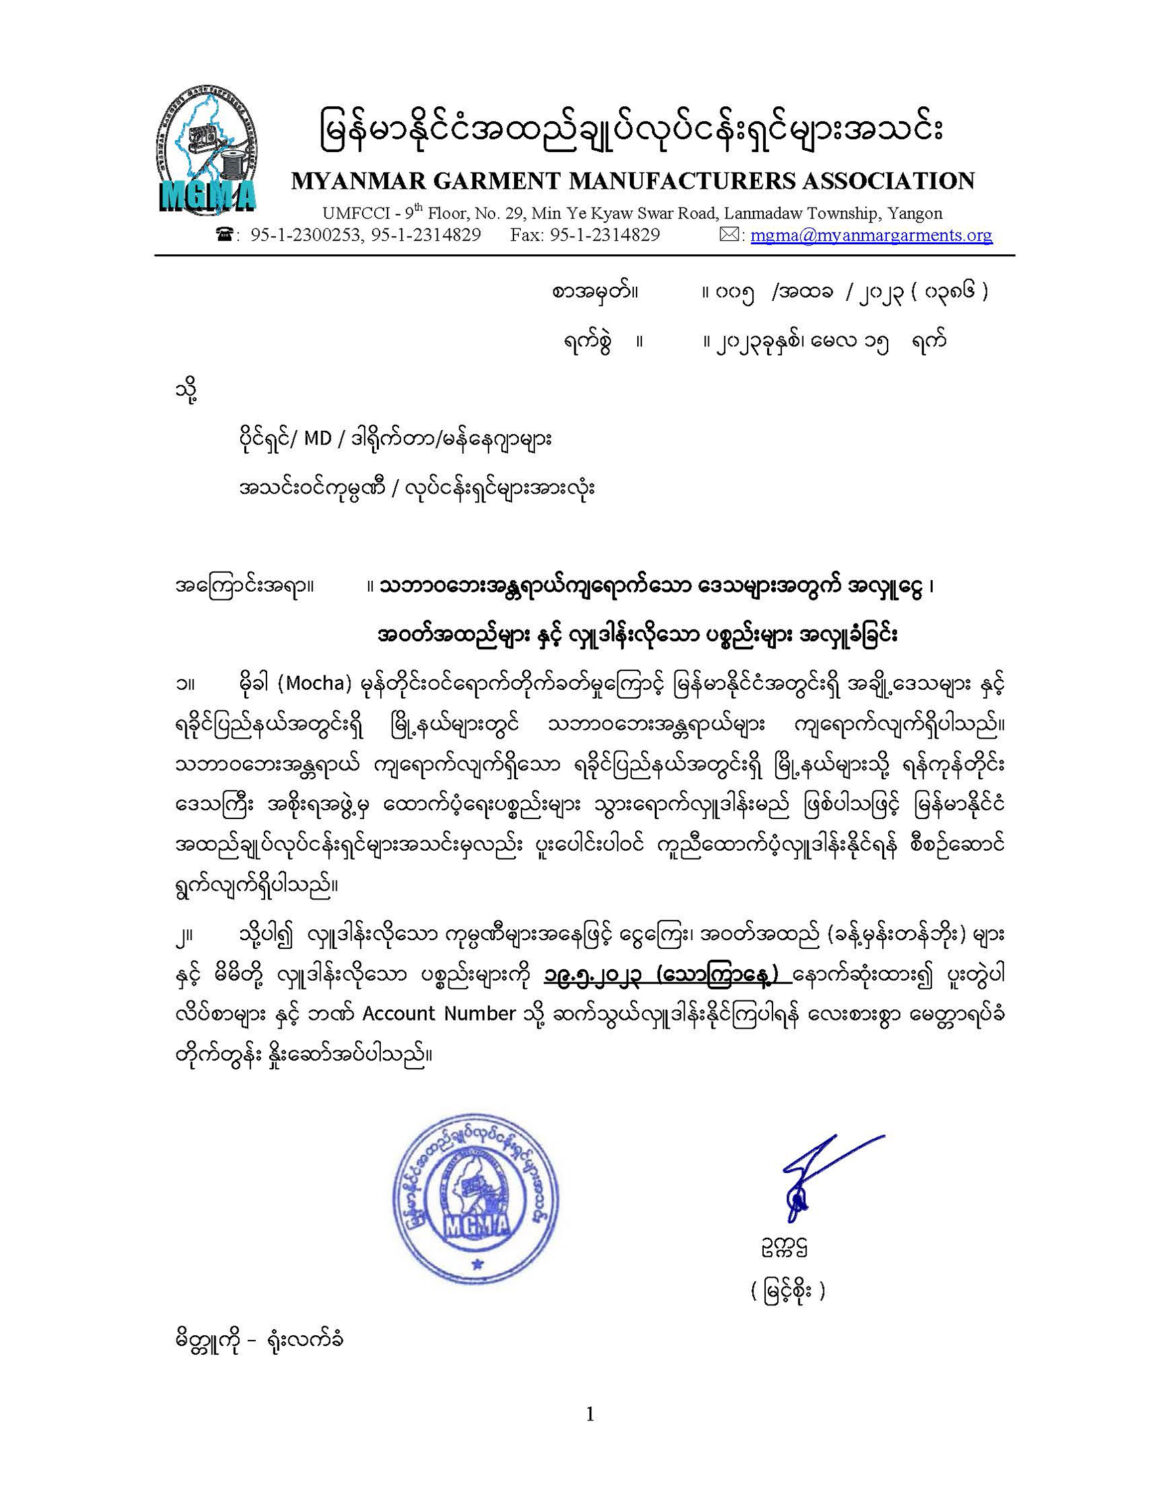 Request your hands to Rakhine affected by Mocha Cyclone on 14.5.2023